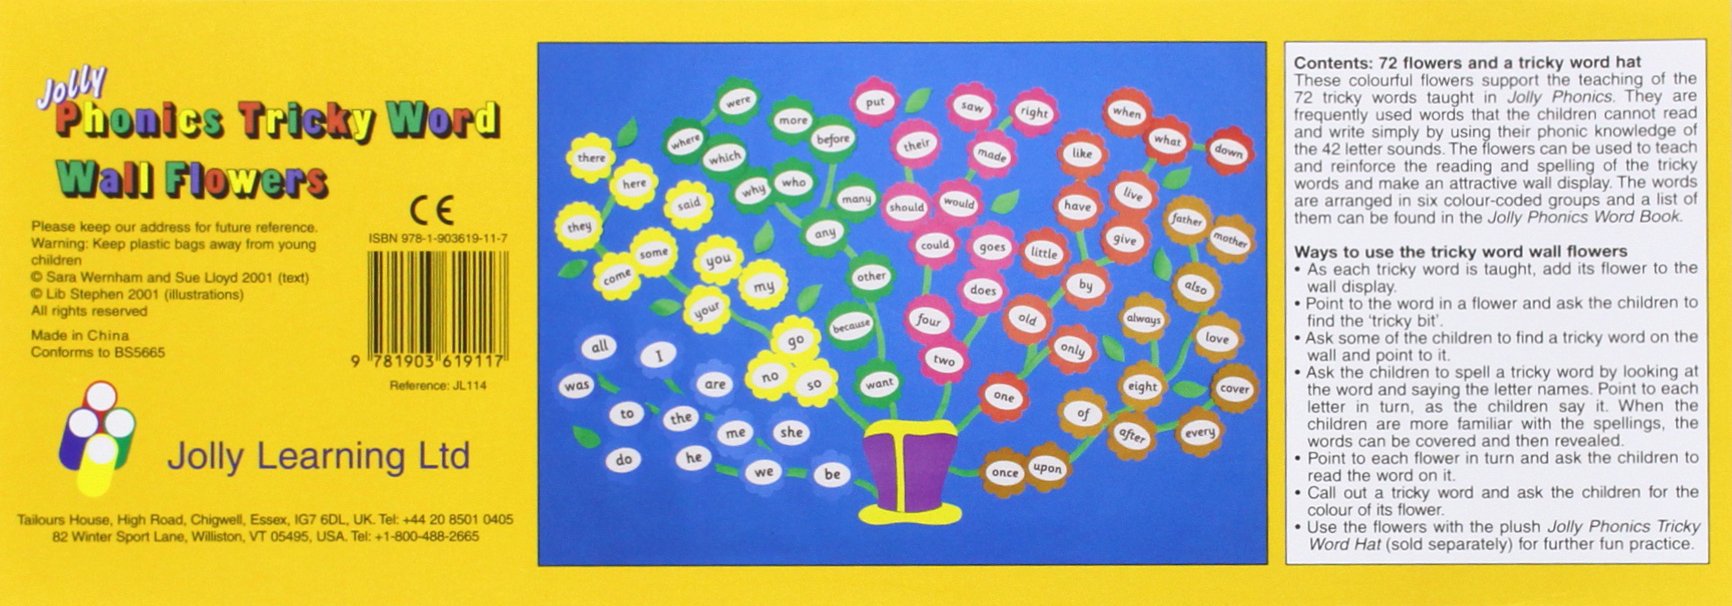 Jolly Phonics Tricky Words Poster